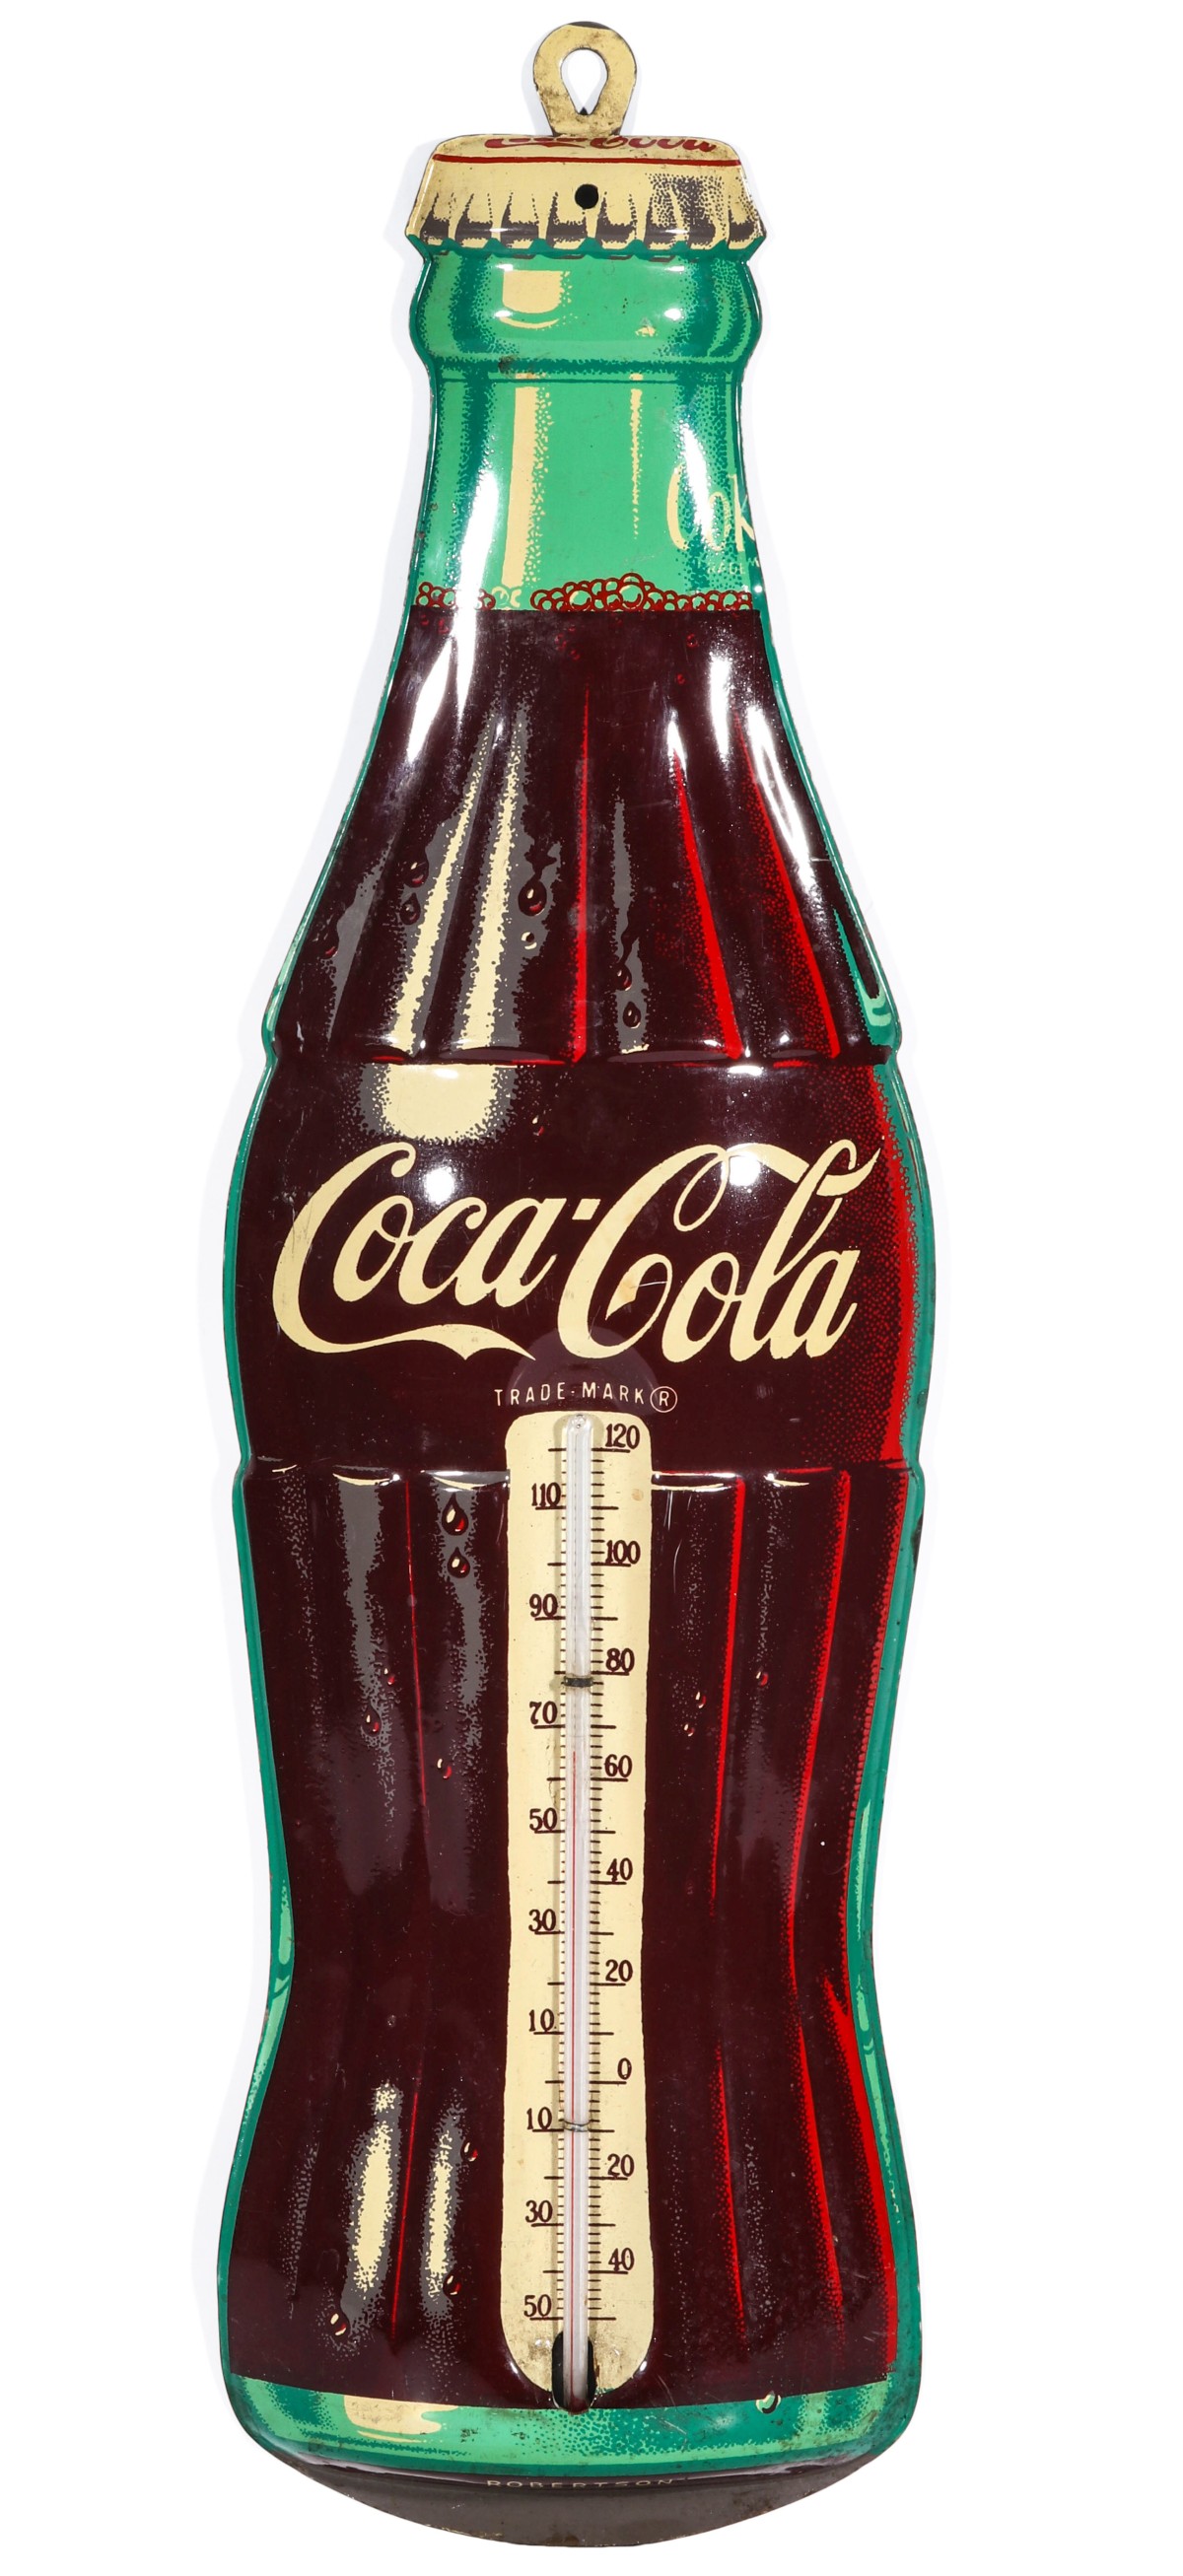 A 1958 COCA-COLA TIN LITHO ADVERTISING THERMOMETER